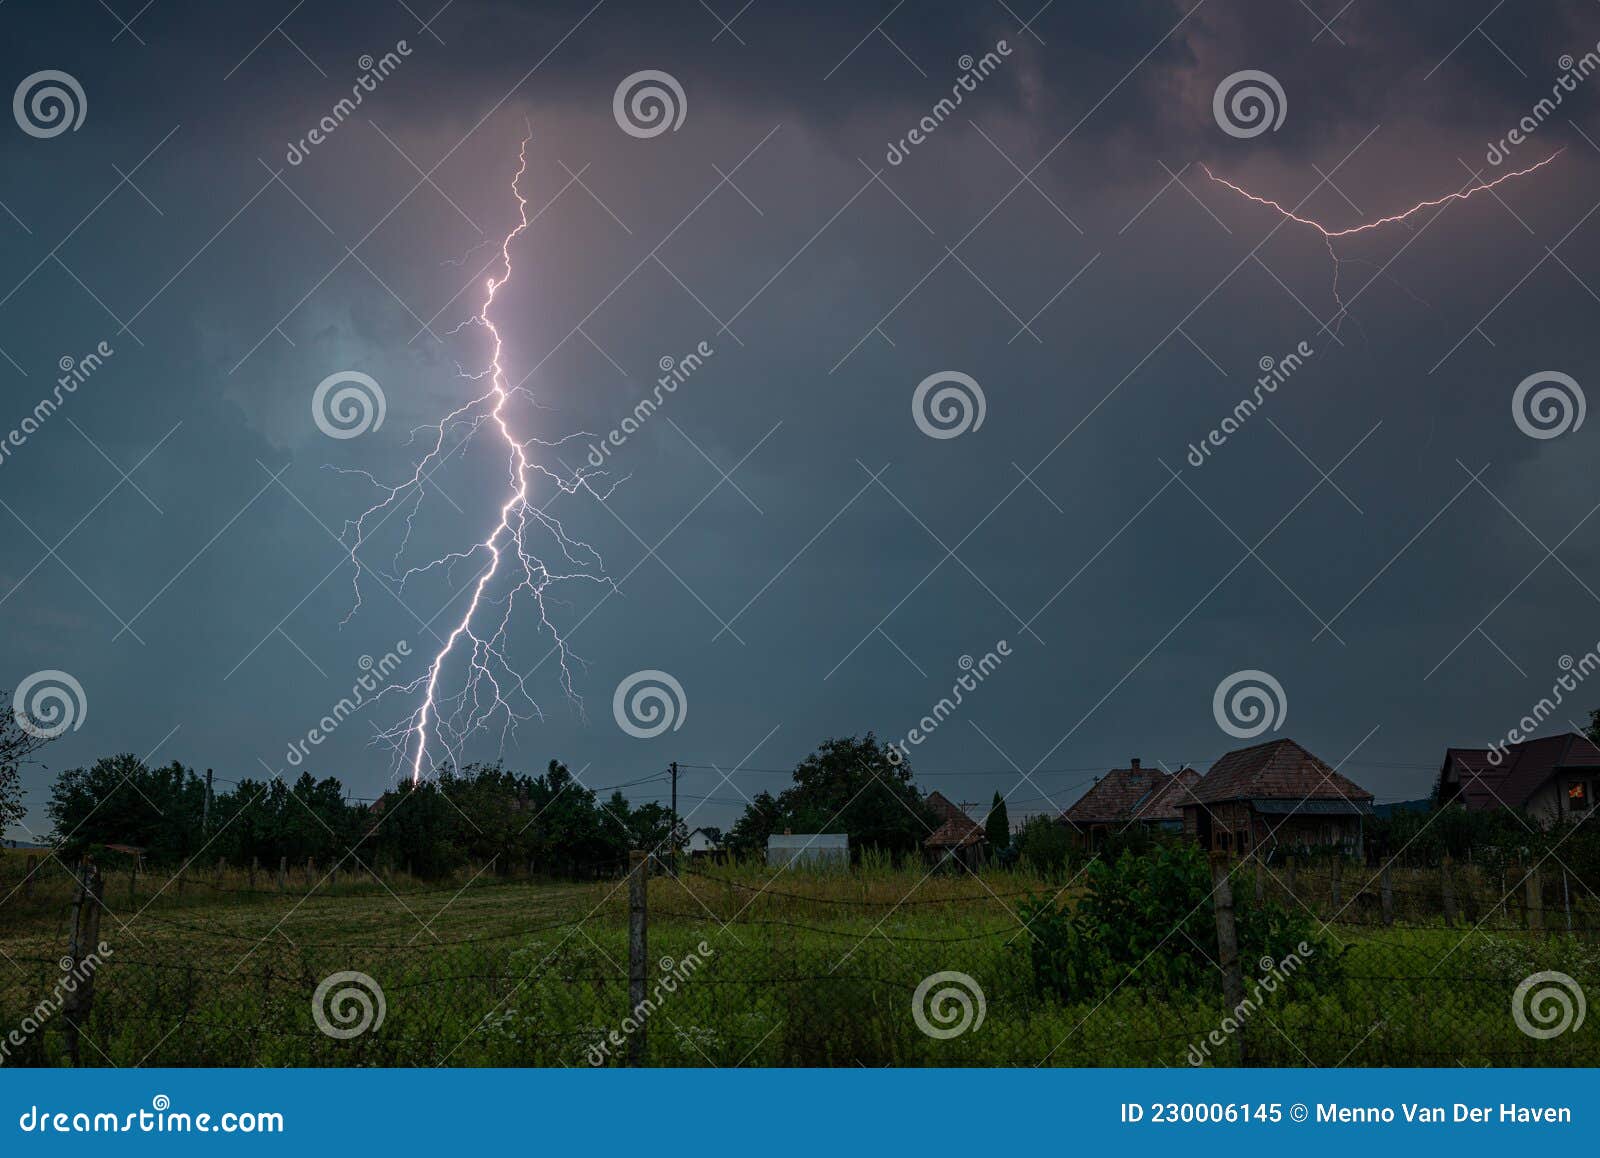 Dangerously Close Thunderbolt in the Landscape Stock Image - Image nature, clouds: 230006145